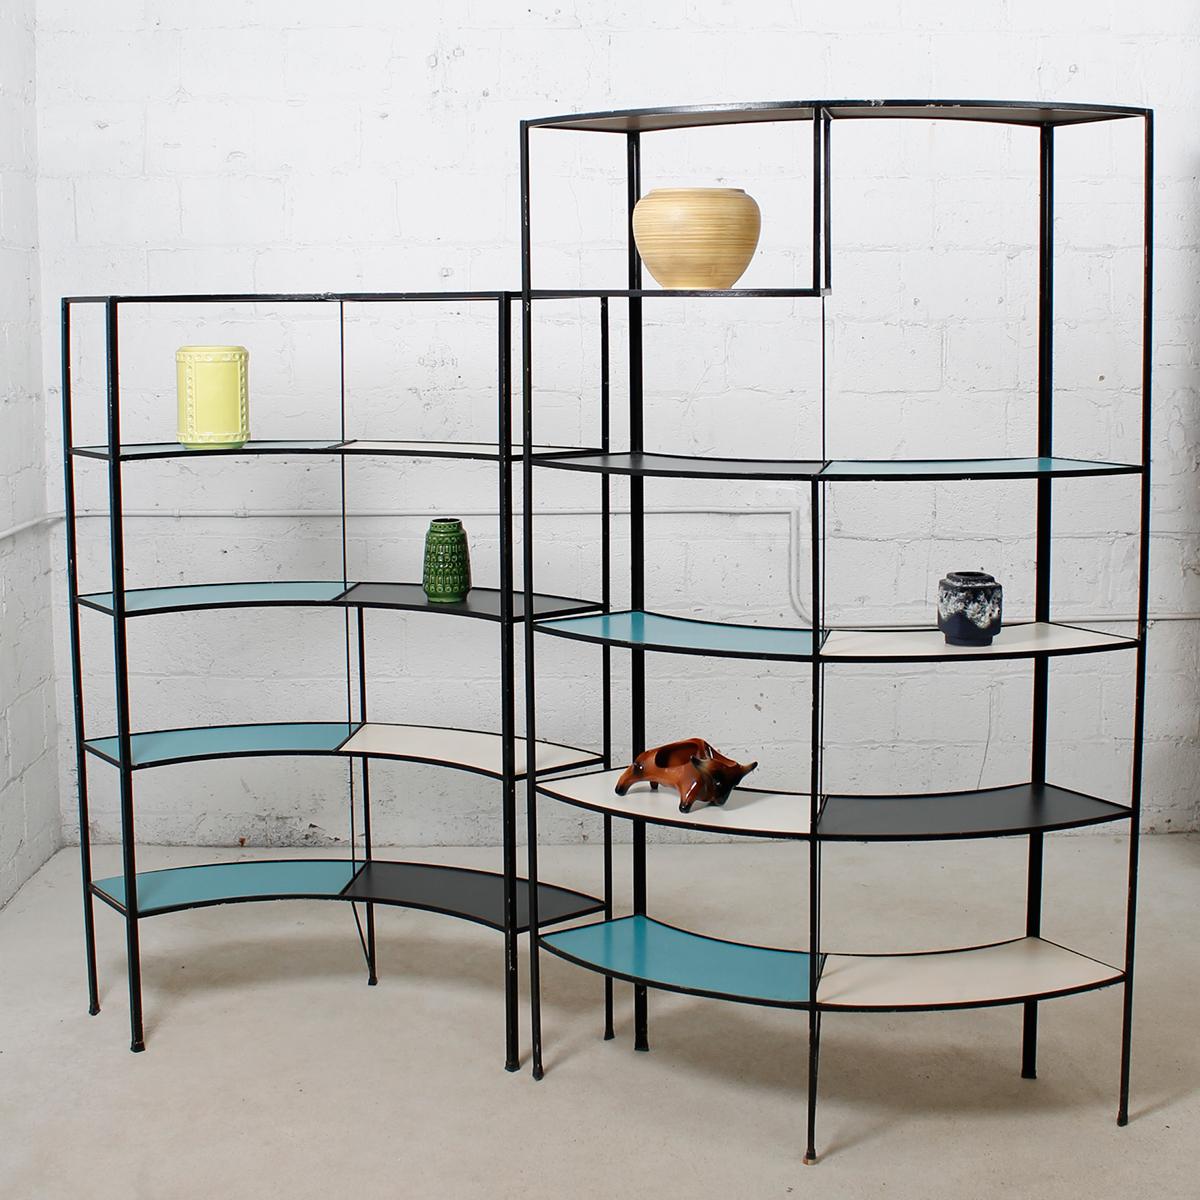 Set of Rare Multi-Color Curved Shelving Units by Frederick Weinberg In Excellent Condition For Sale In Kensington, MD